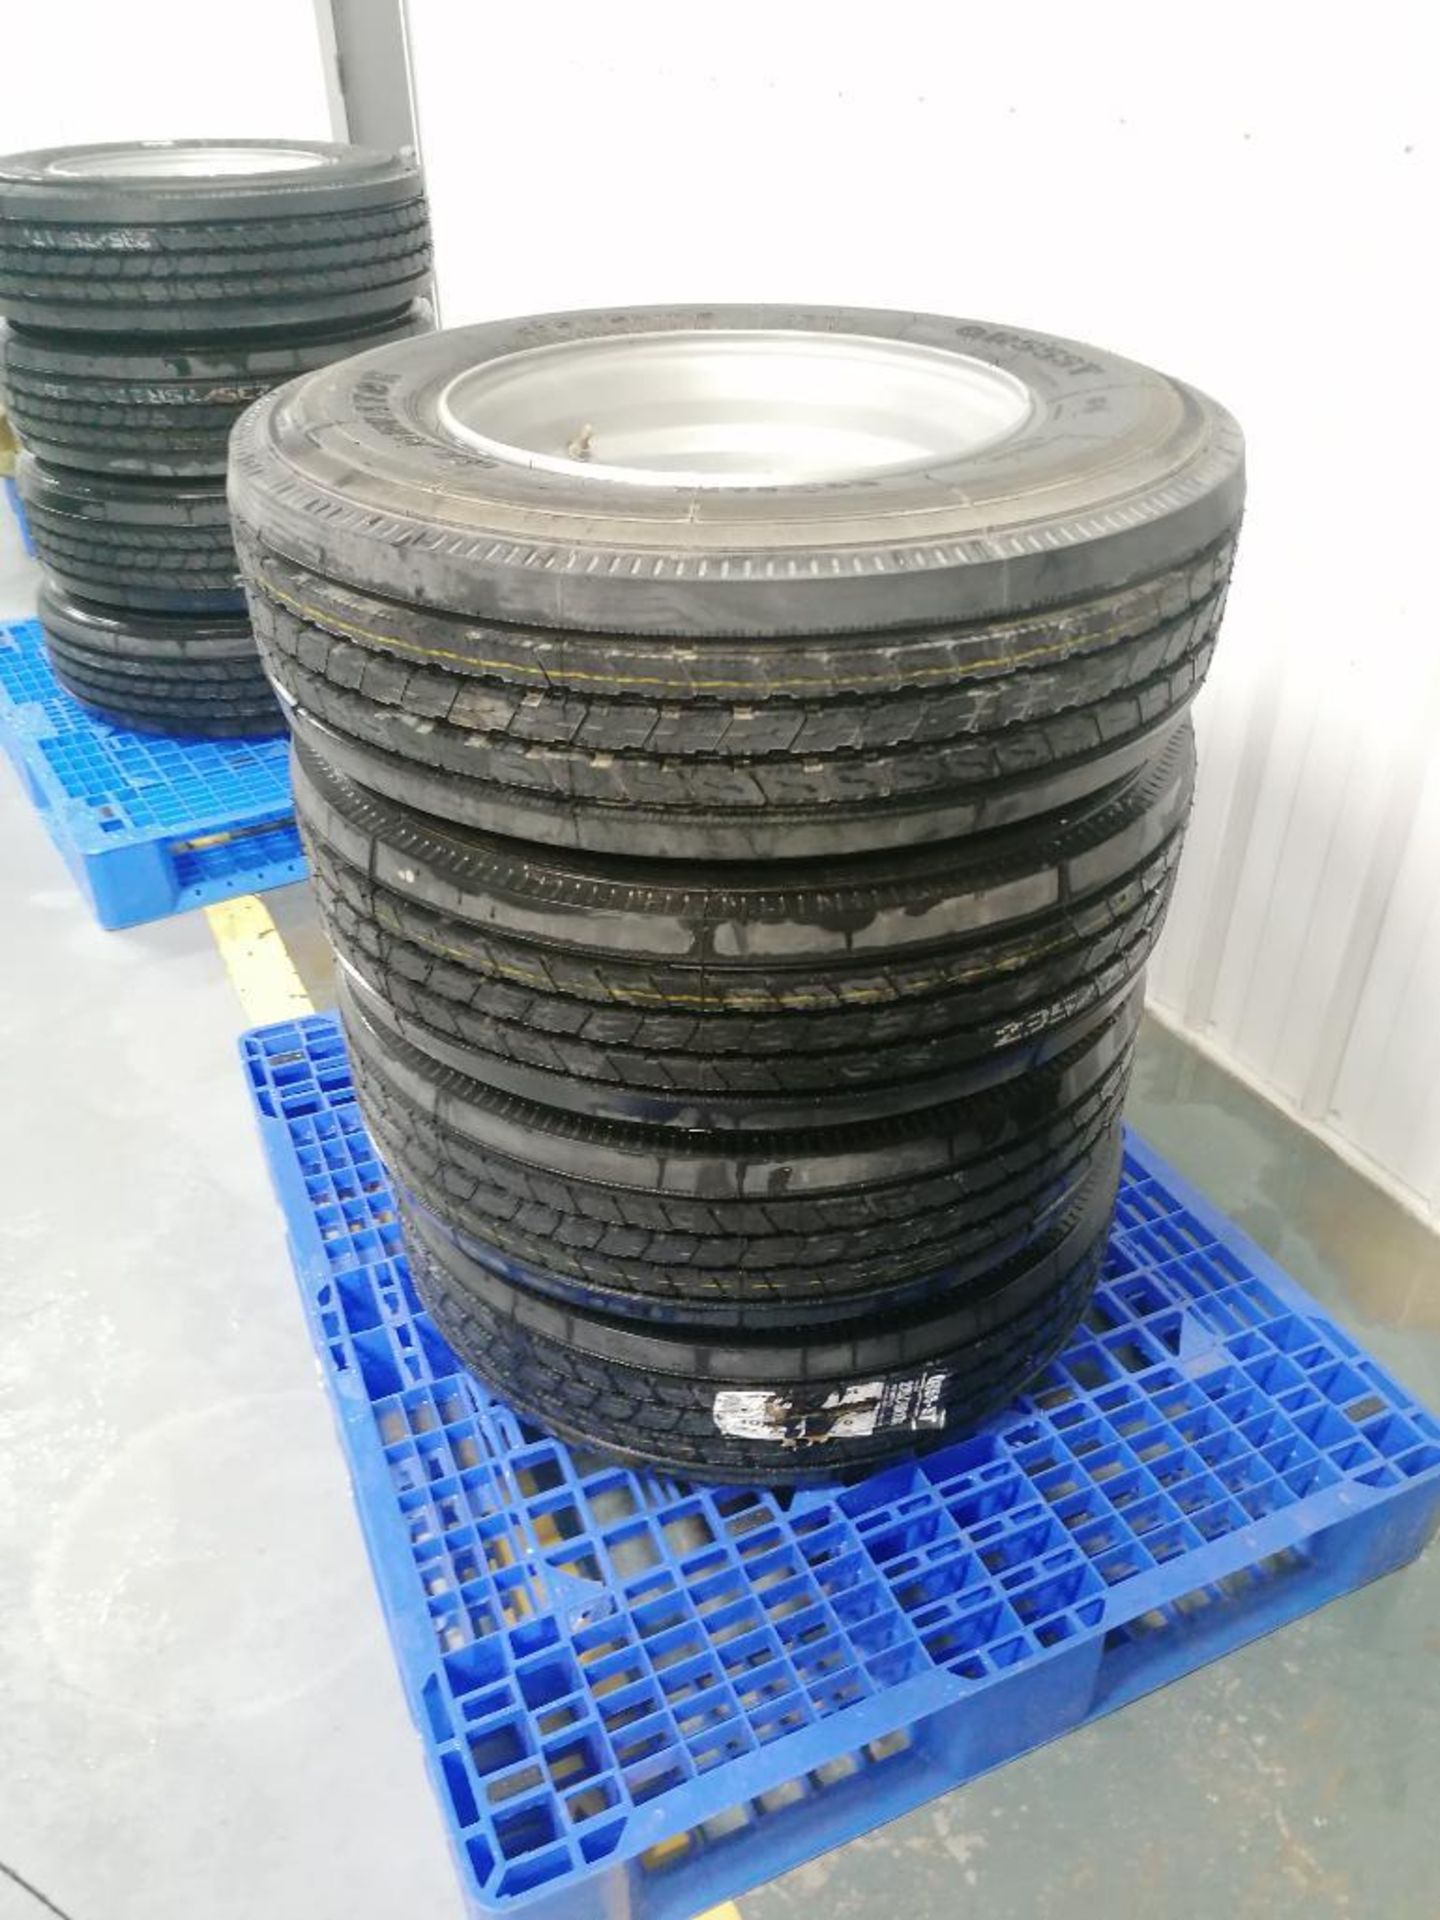 (4) Gladiator QR55T 235/75R17.5 Tires with 8 Bolt Pattern 6" Center Rims. Located in Mt. Pleasant,